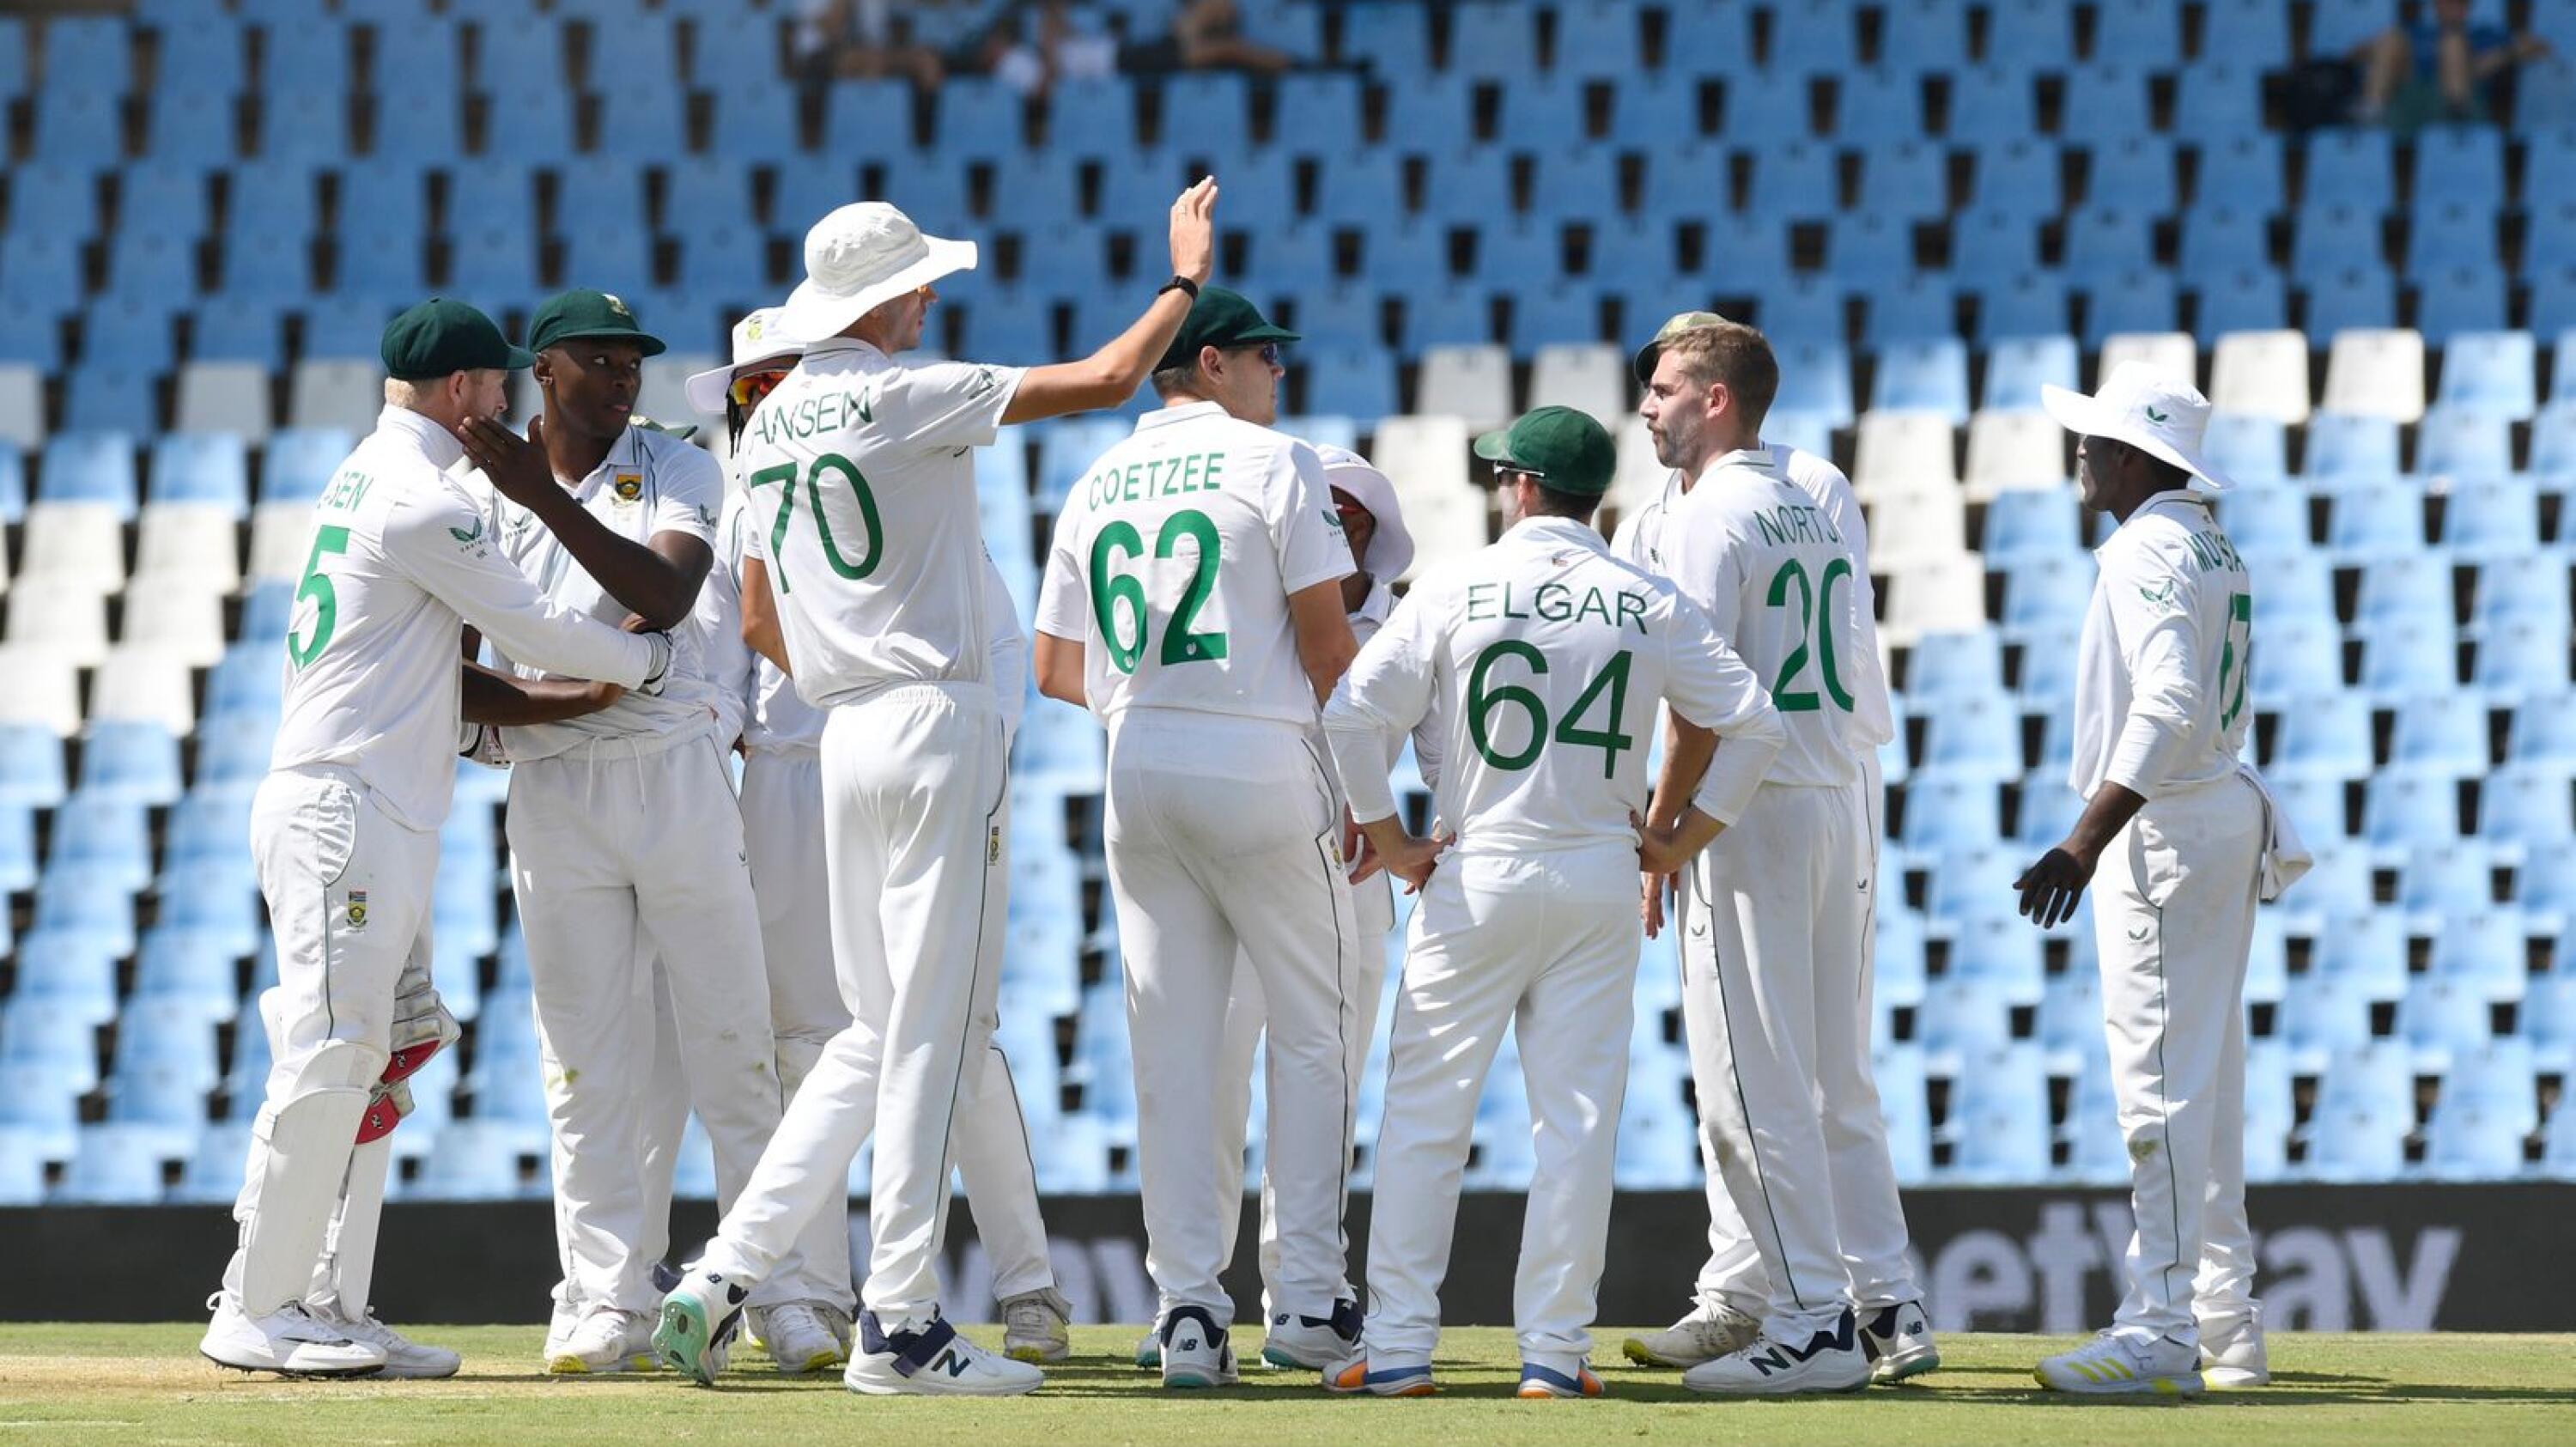 Anrich Nortje celebrates a wicket during day two of the first Test against the West Indies at Centurion on Wednesday.